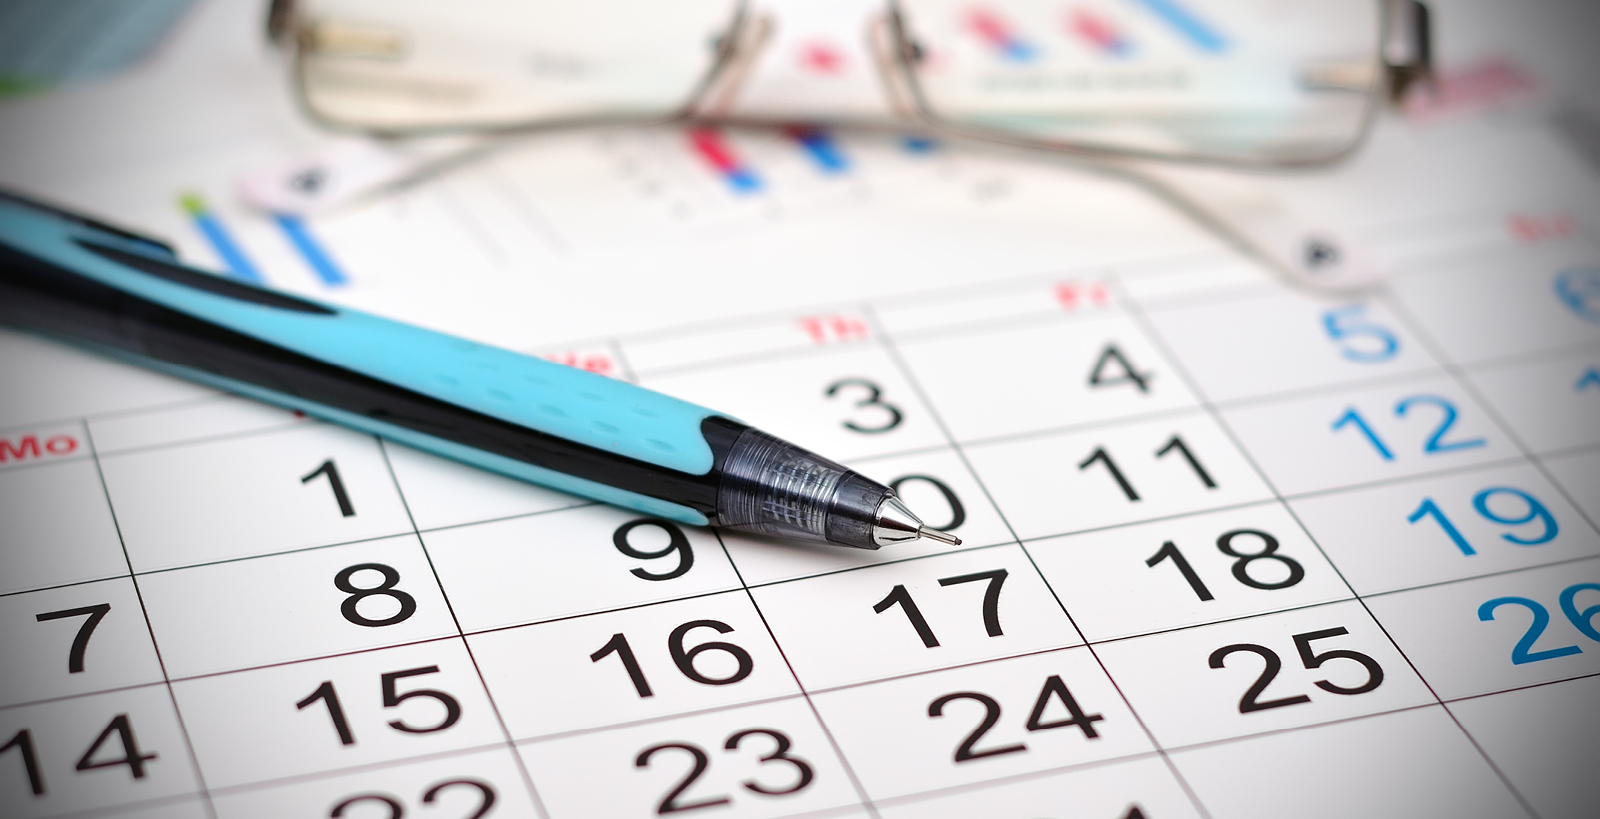 An up-close image of a blue and black pen and a pair of reading glasses on top of a calendar page